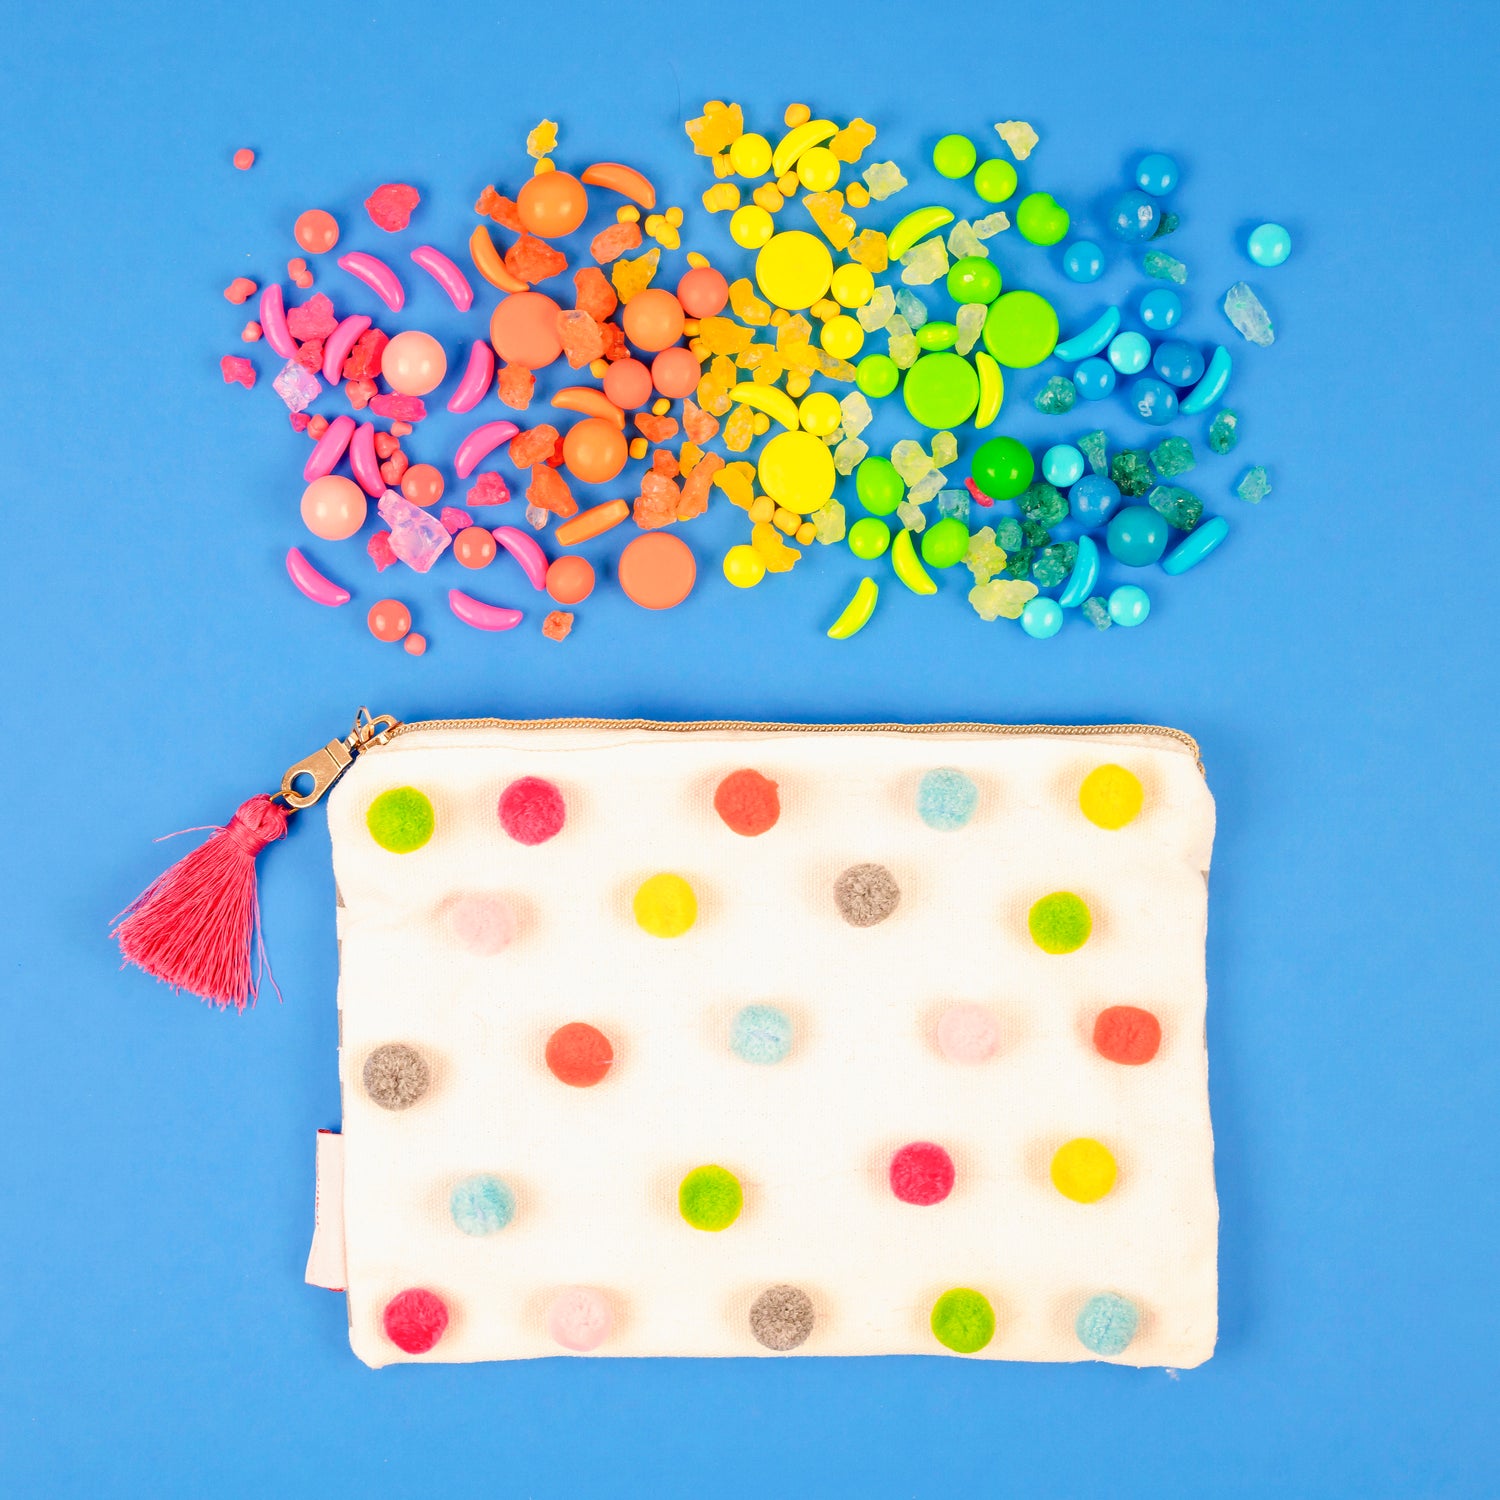 White fabric snack bag with colorful pompoms on the sides, a pink tassle on the gold zipper pull and a rainbow of candies spread above the bag on a blue background.